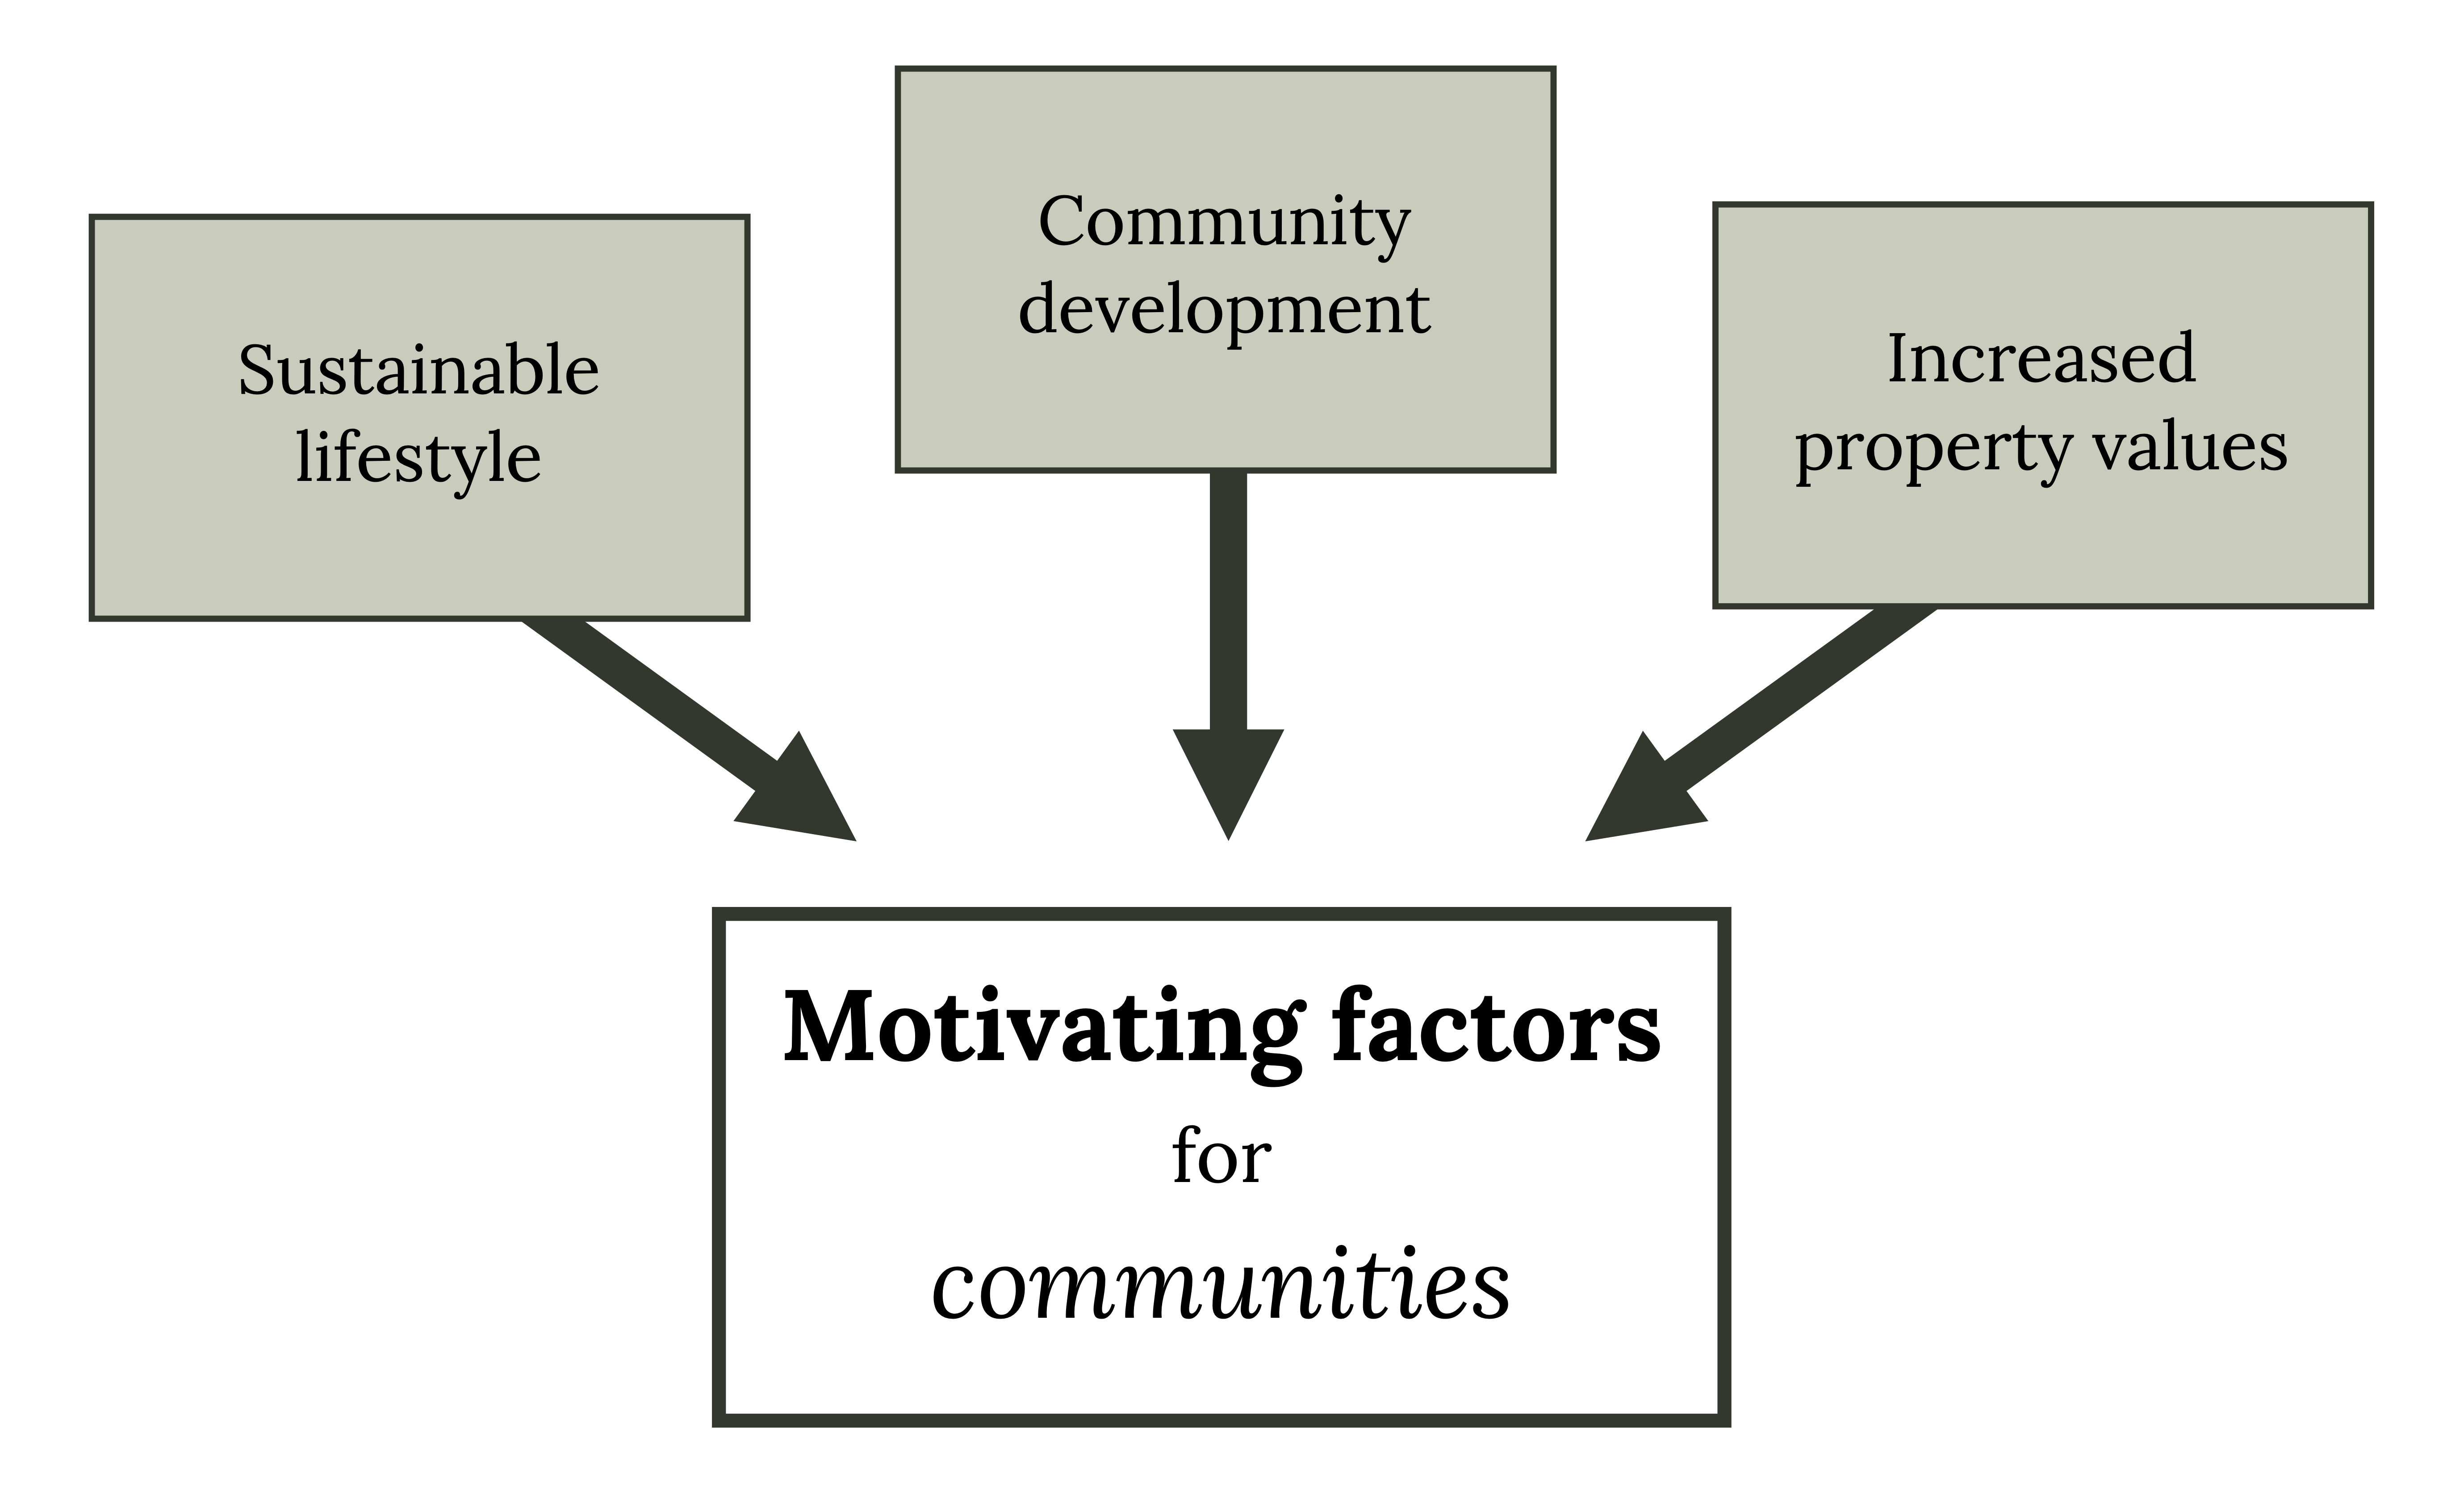 Motivating factors for communities: sustainable lifestyle, community development, increased property values.